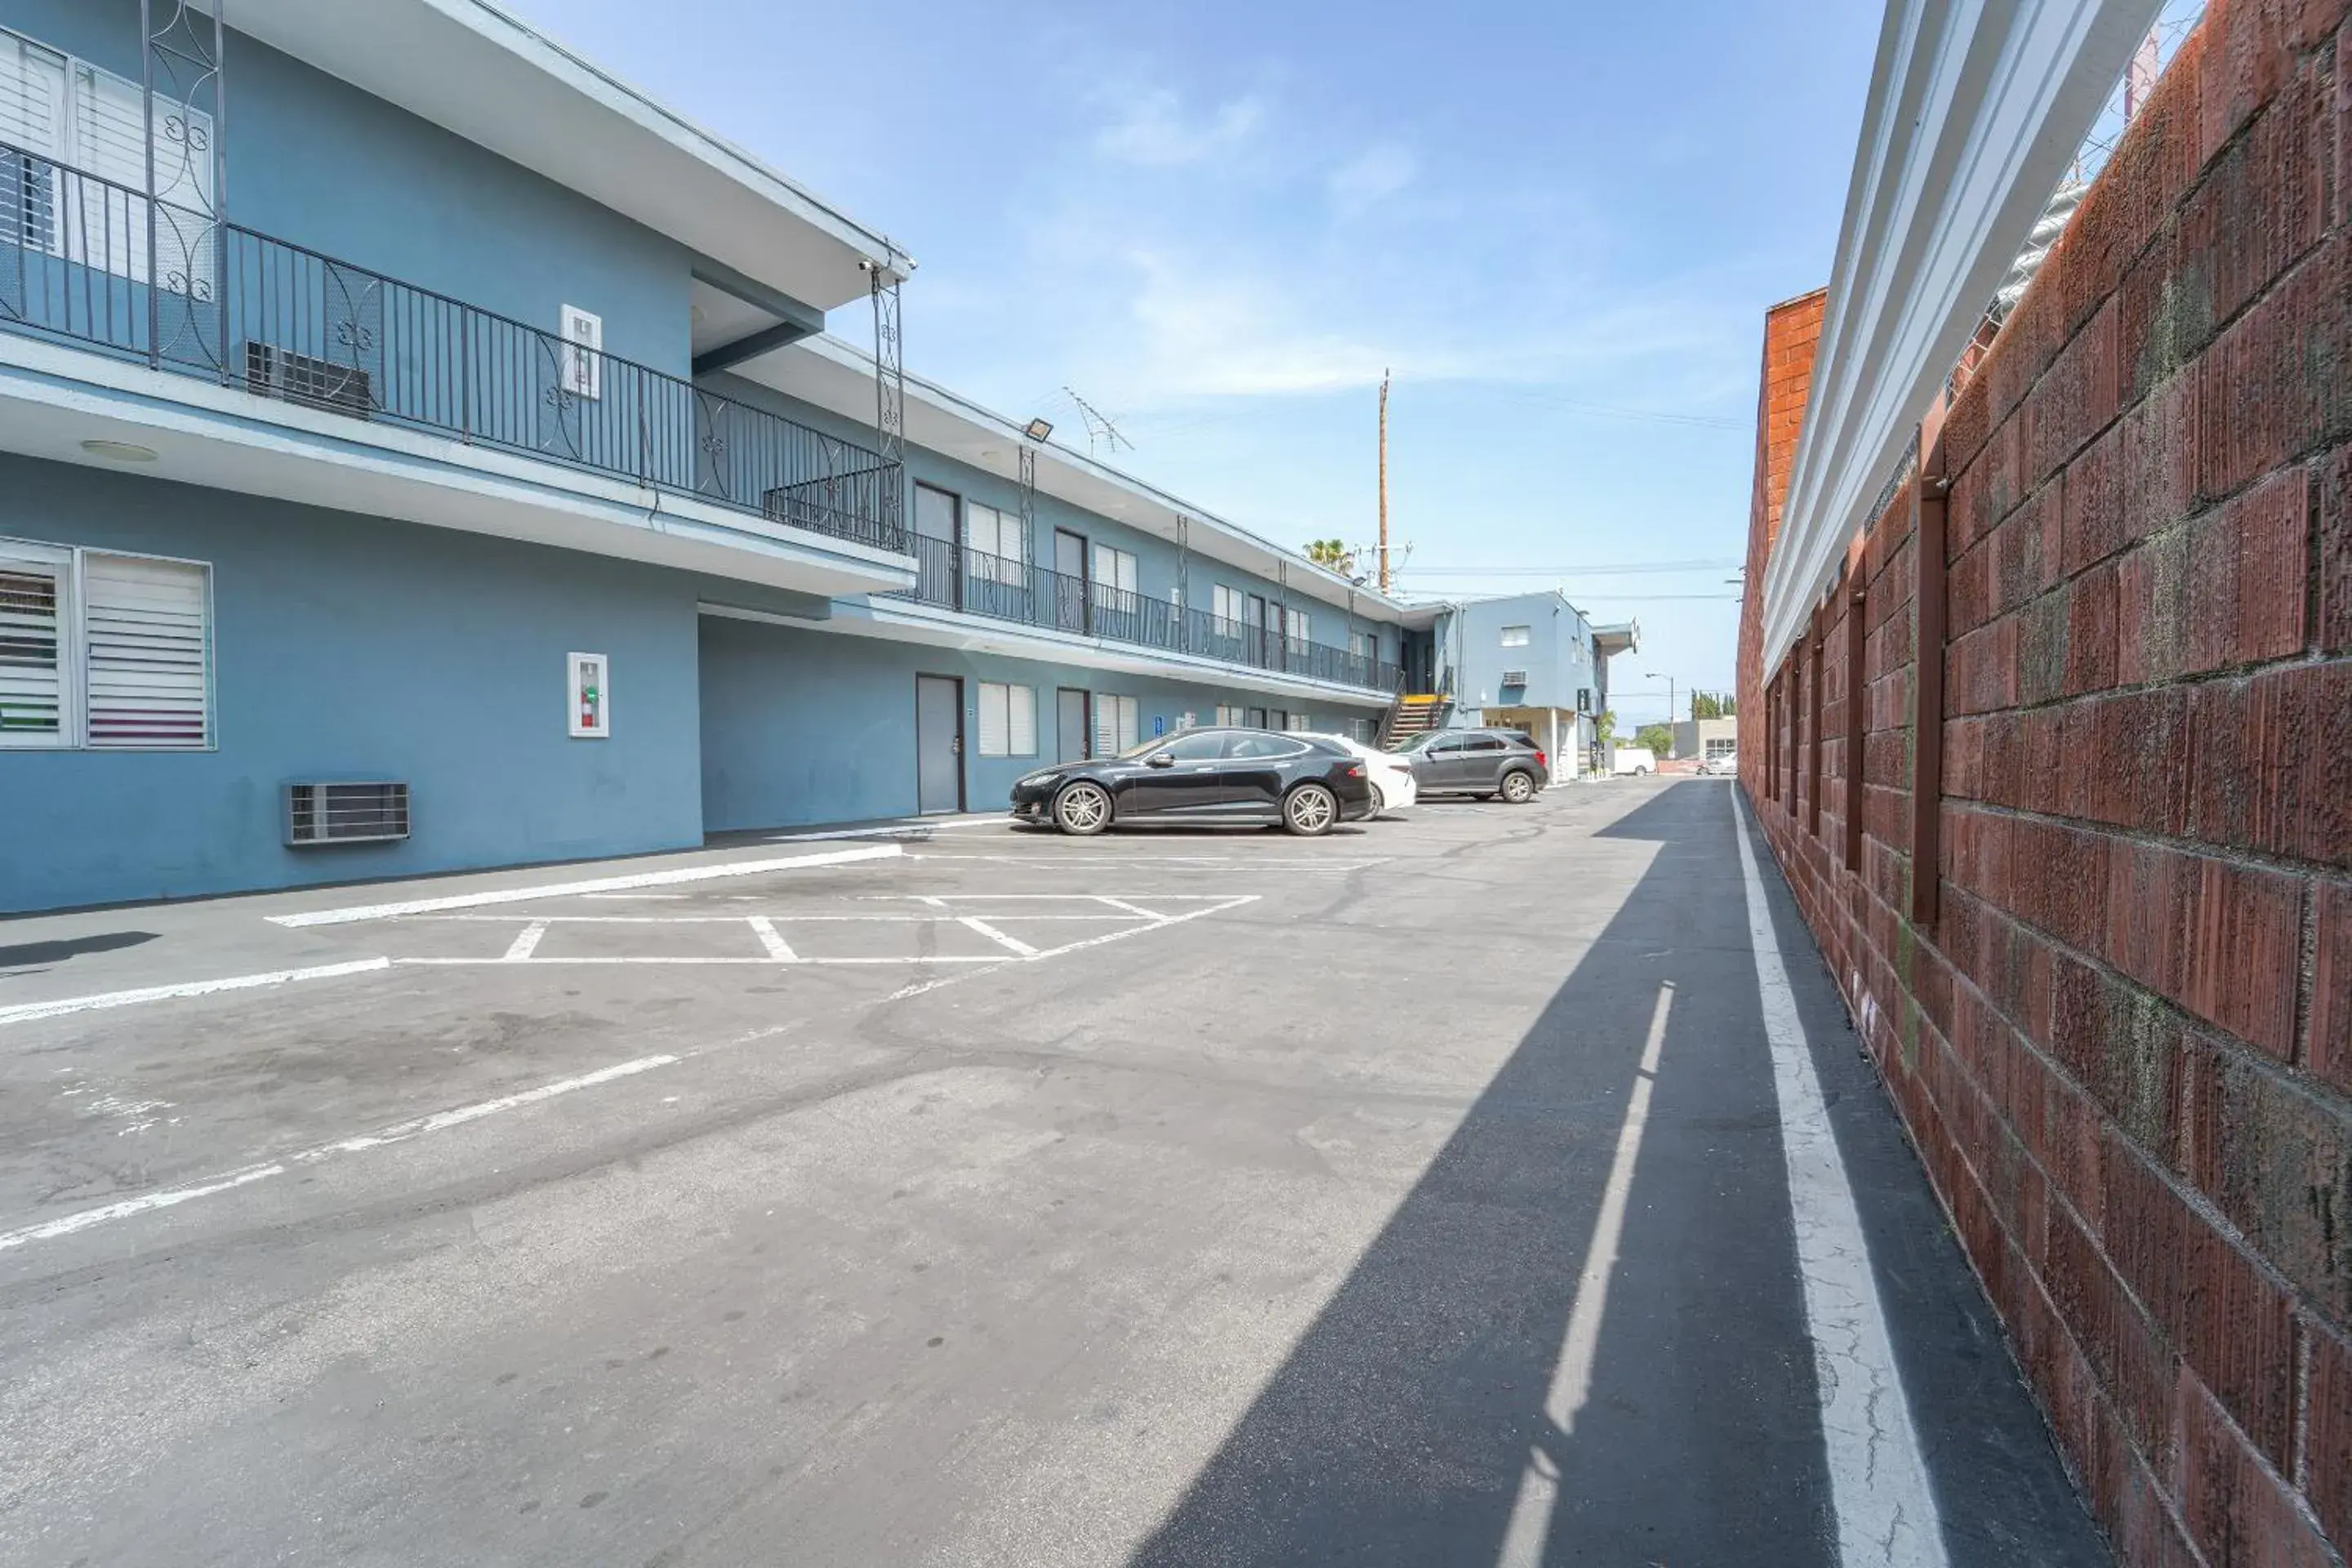 Parking, Property Building in NOHO Hotel Hollywood LA